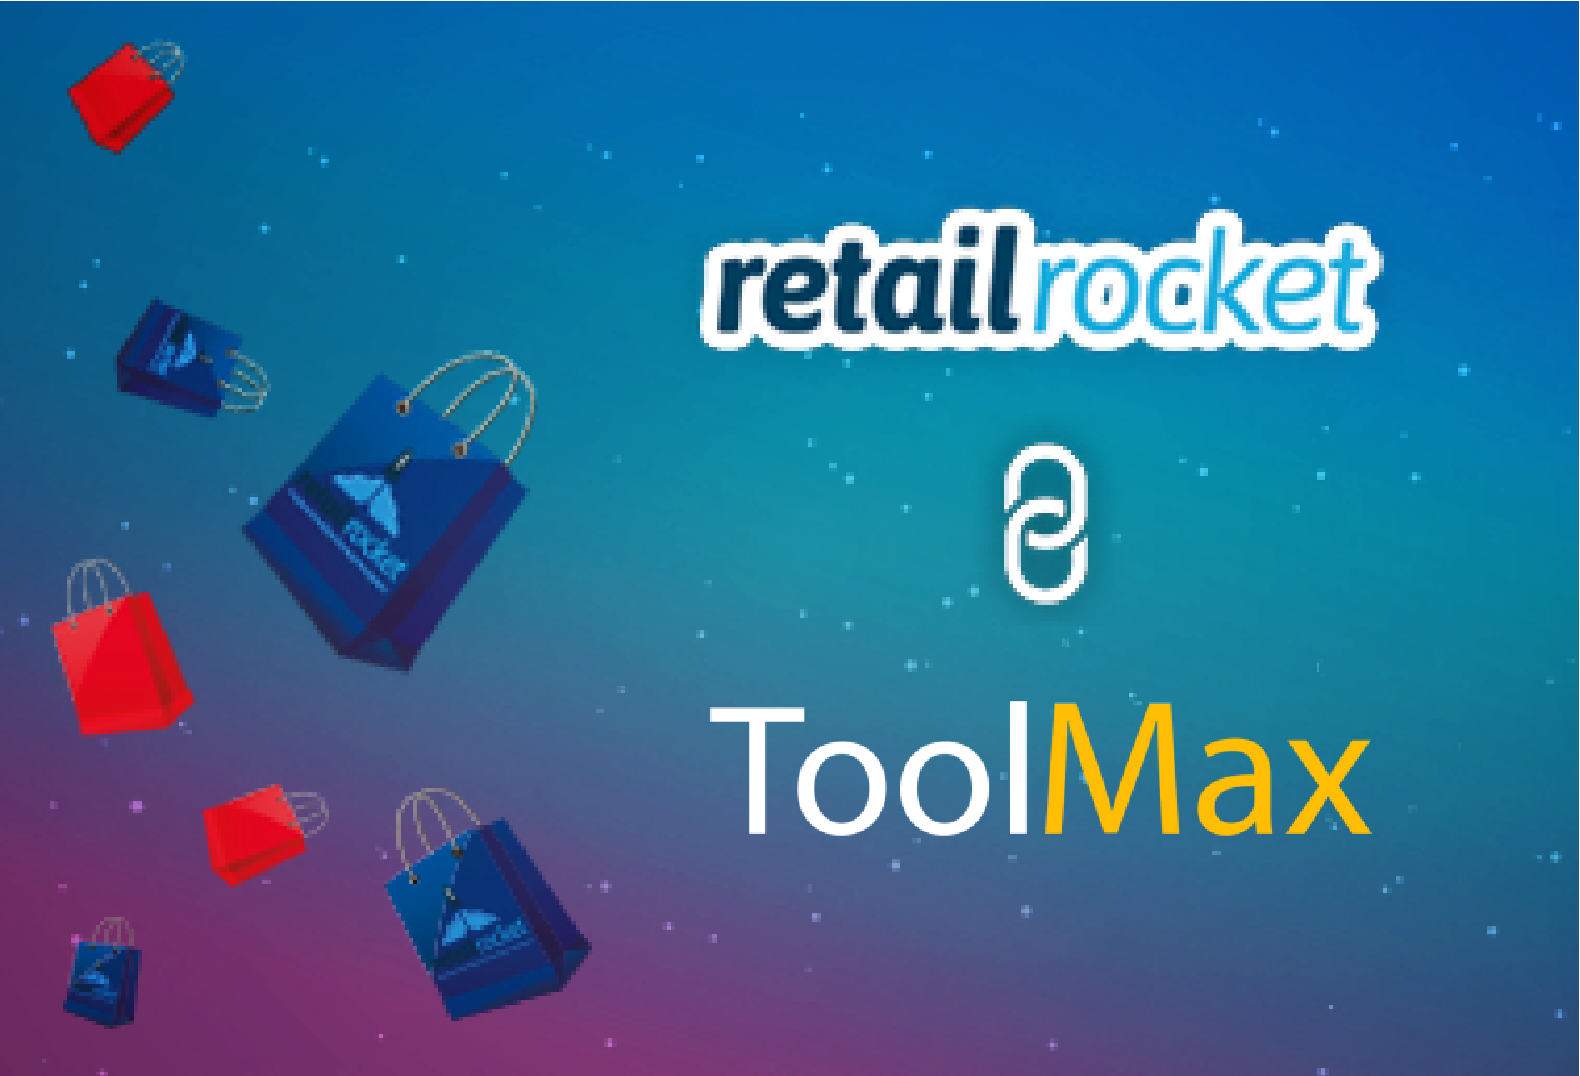 ToolMax’s product page Growth Hacking: over 10% revenue growth